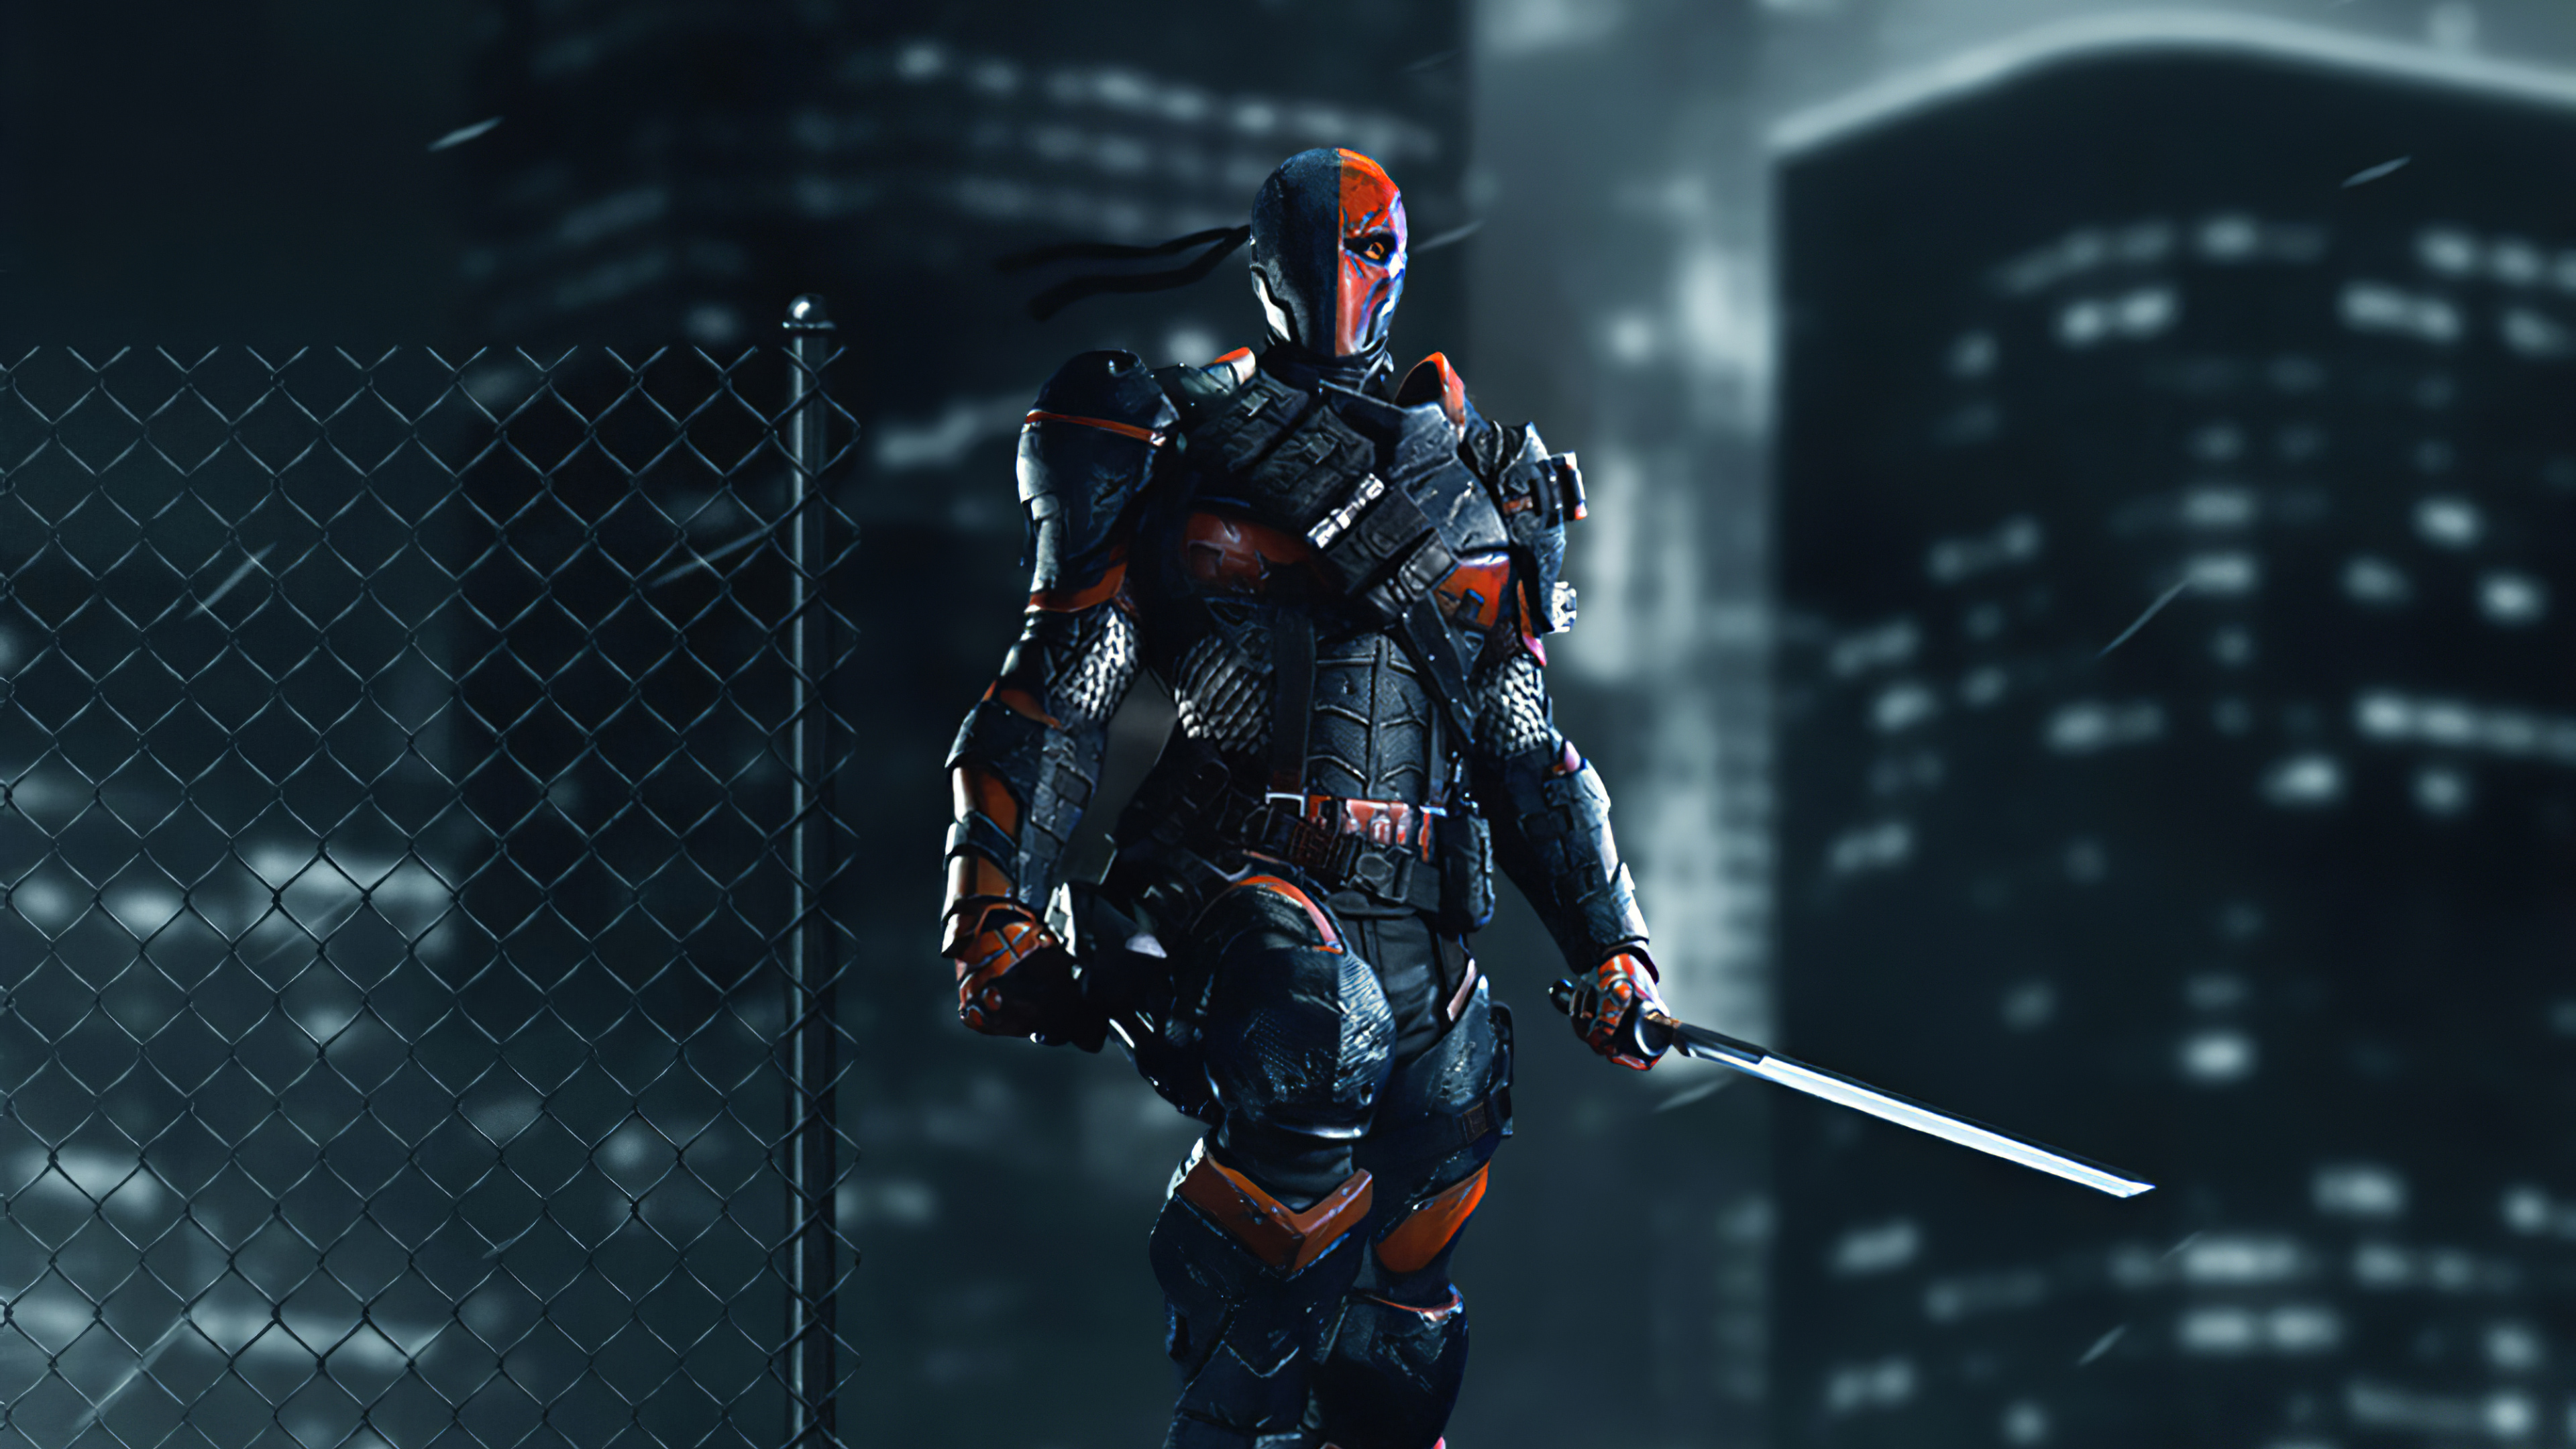 Deathstroke with a Sword